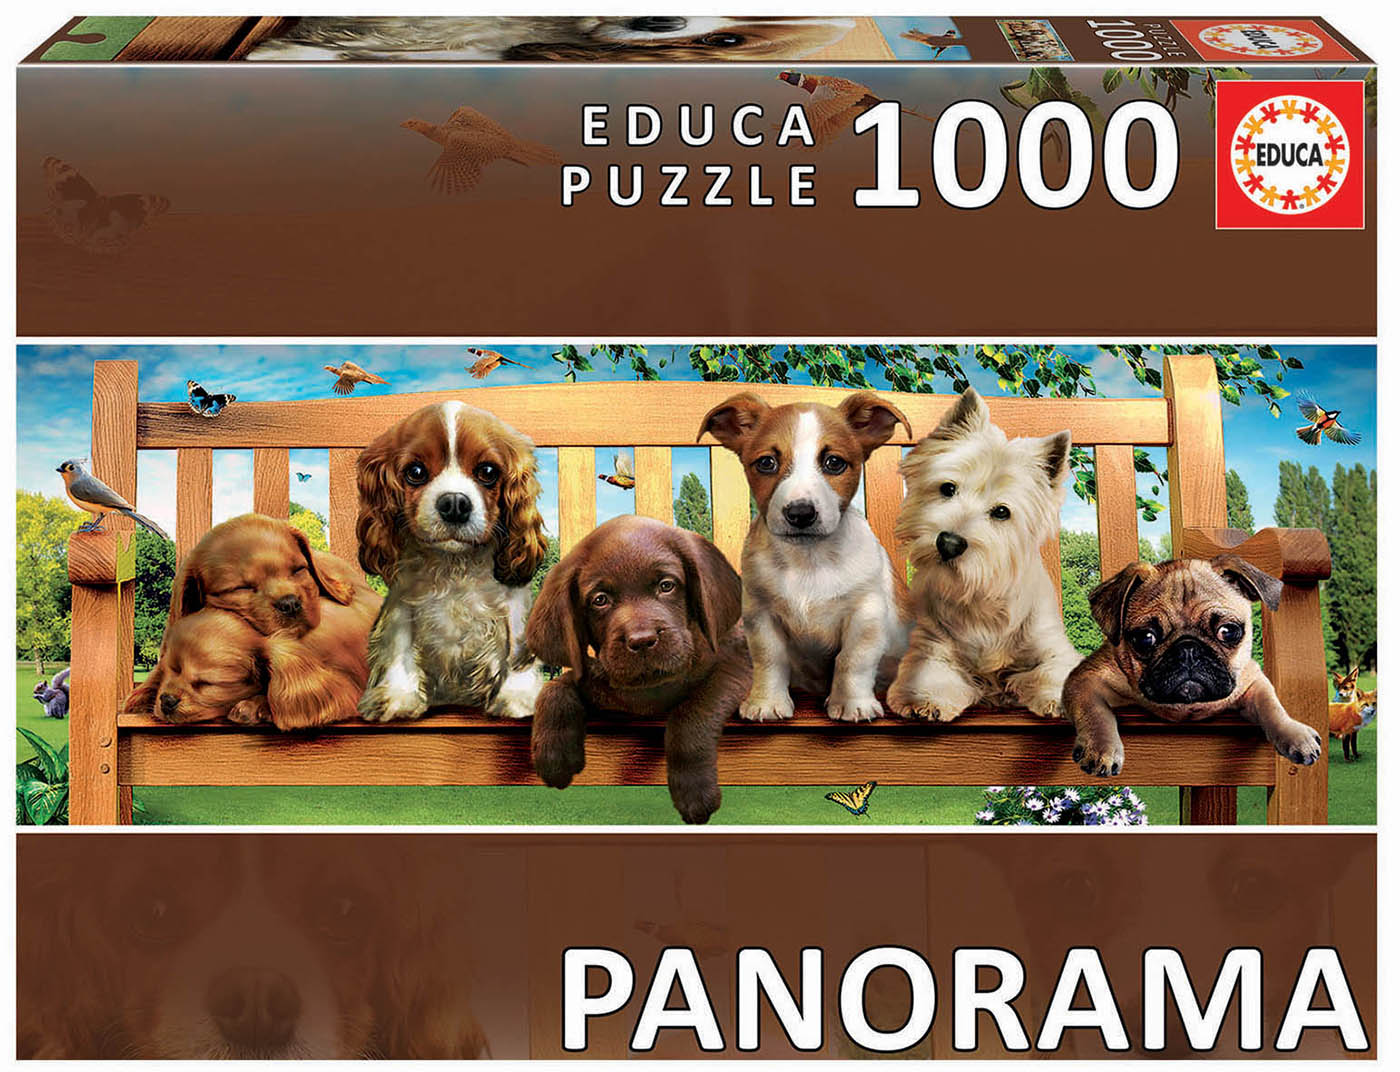 1000 Puppies in the Bank "Panorama"